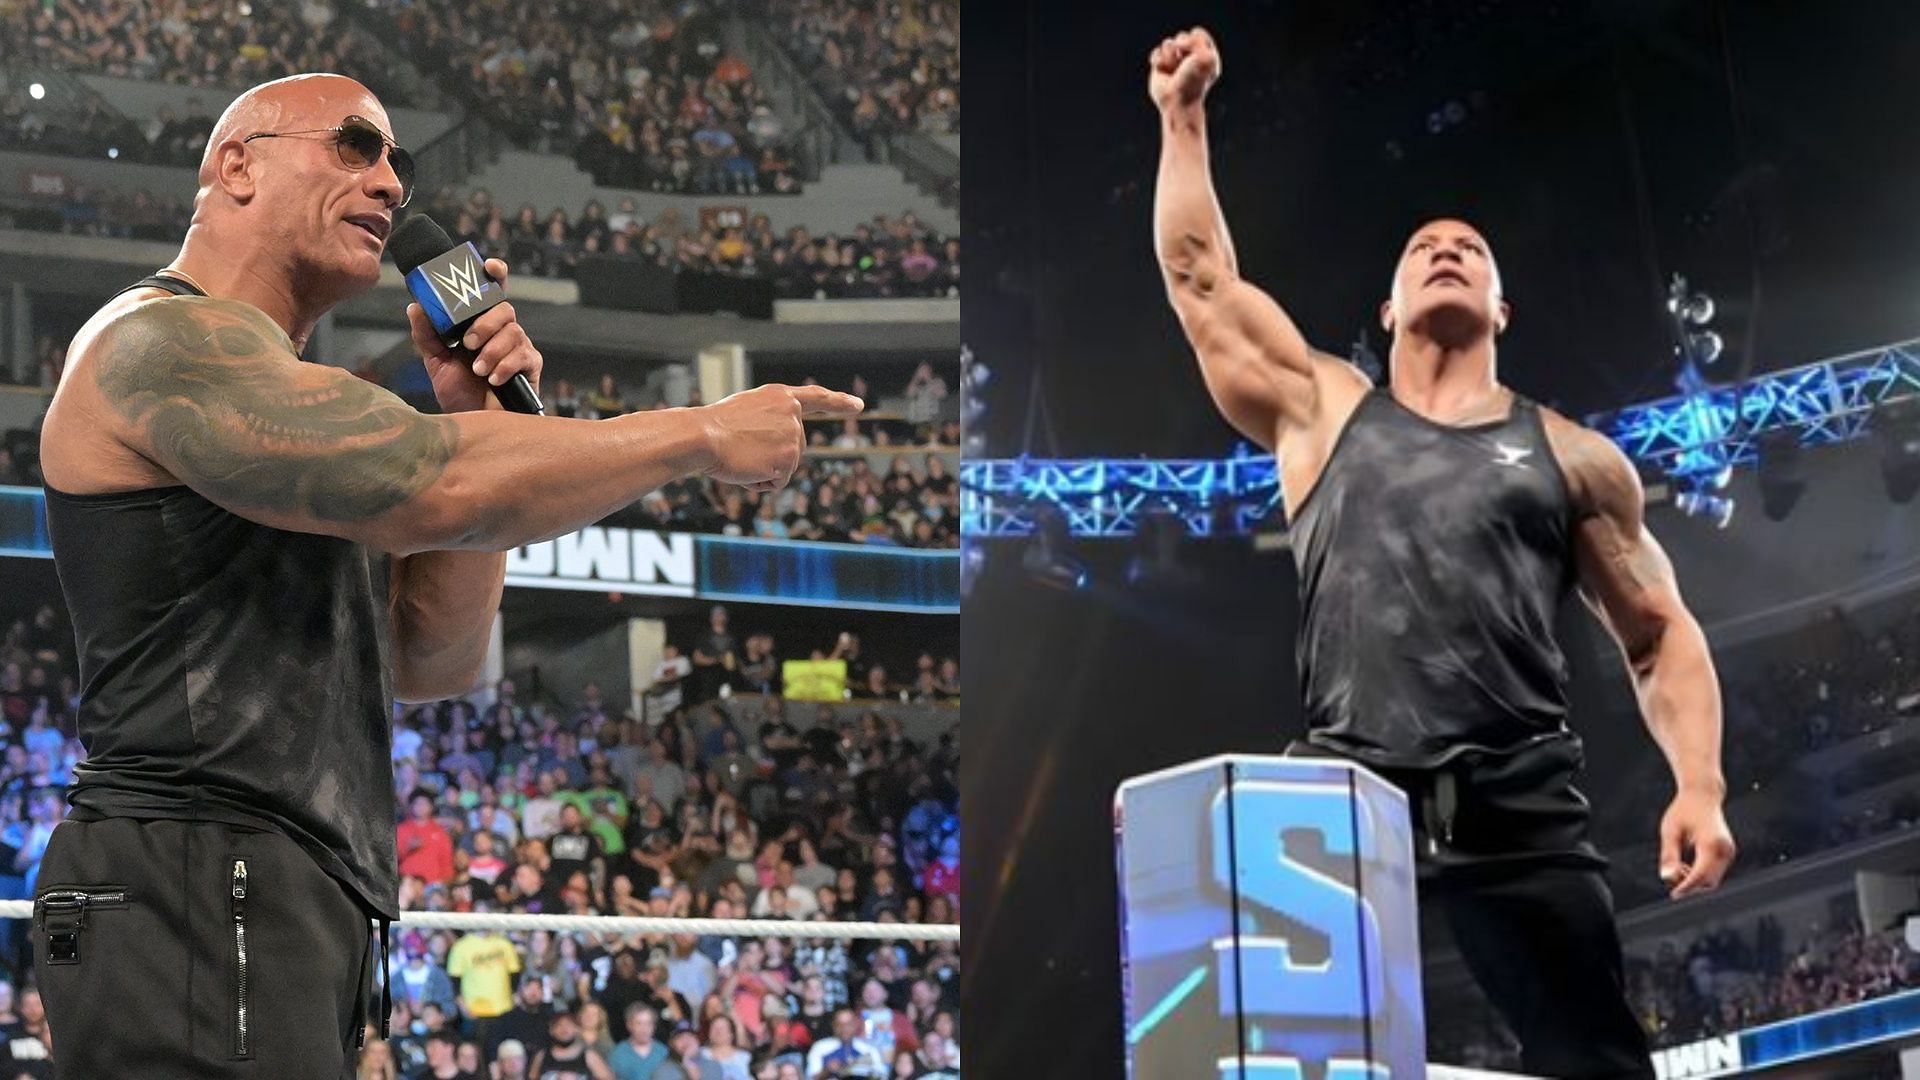 The Rock recently made his return to WWE